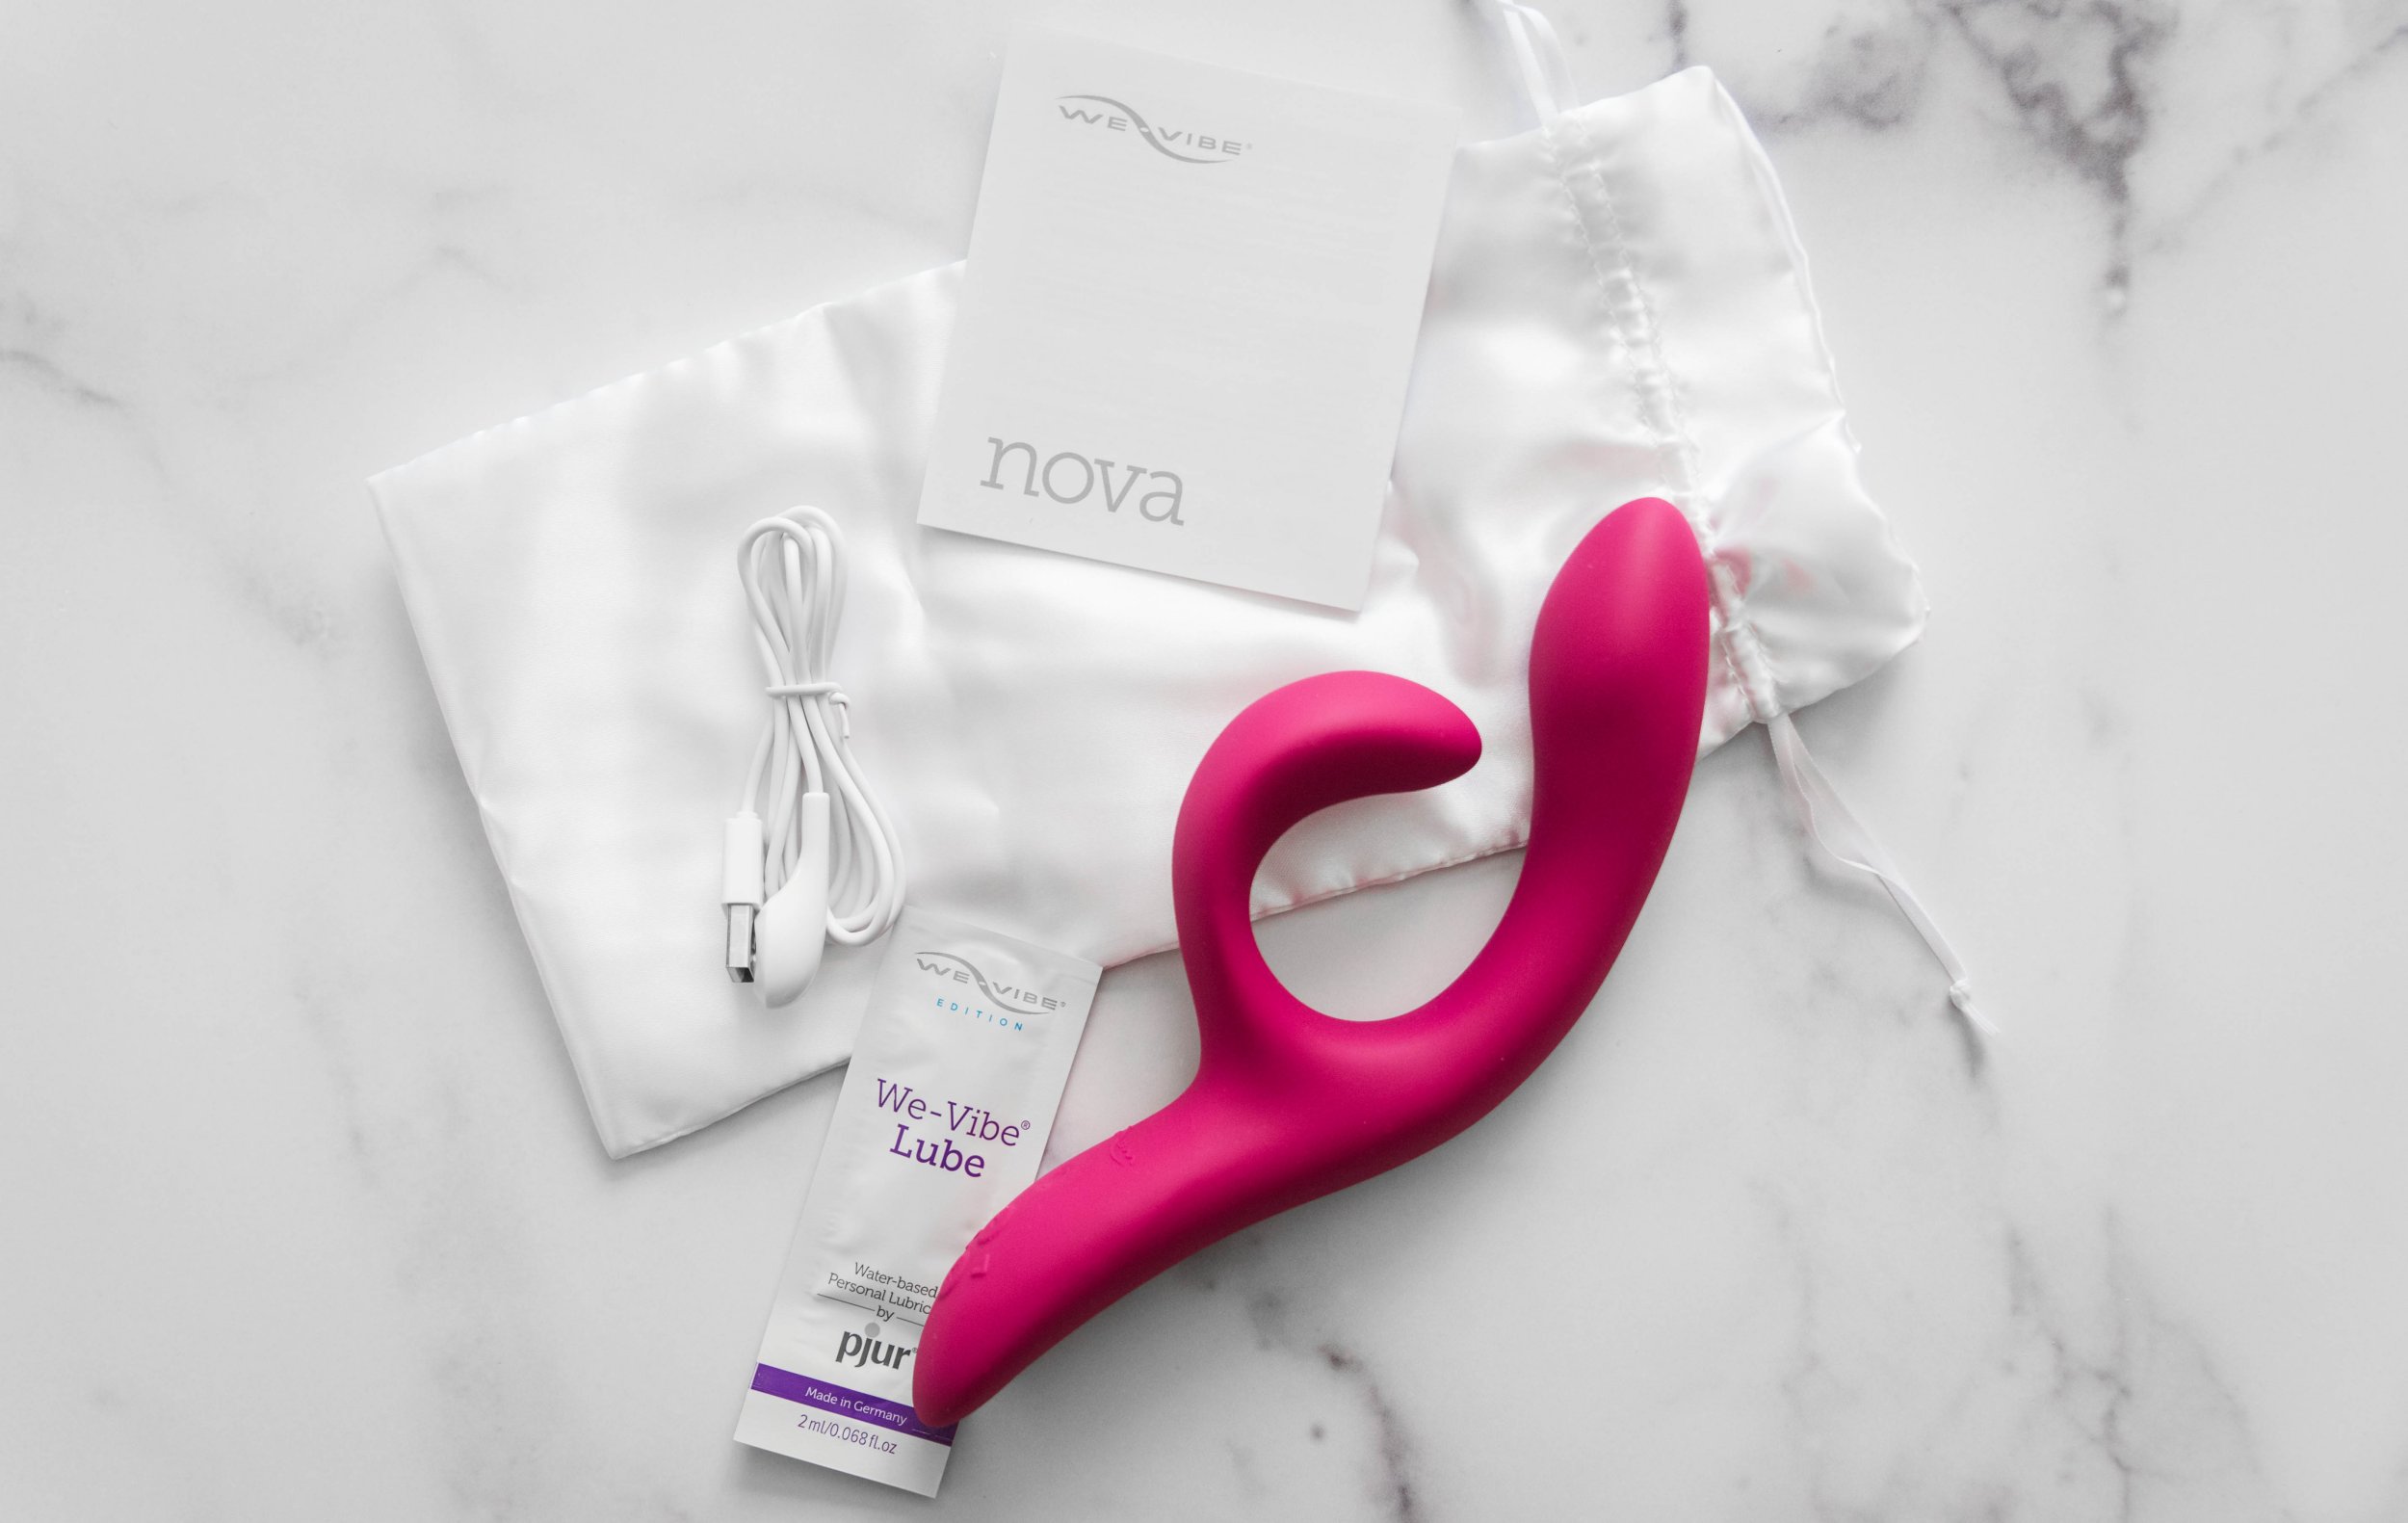 We-Vibe Nova 2 with contents of the box